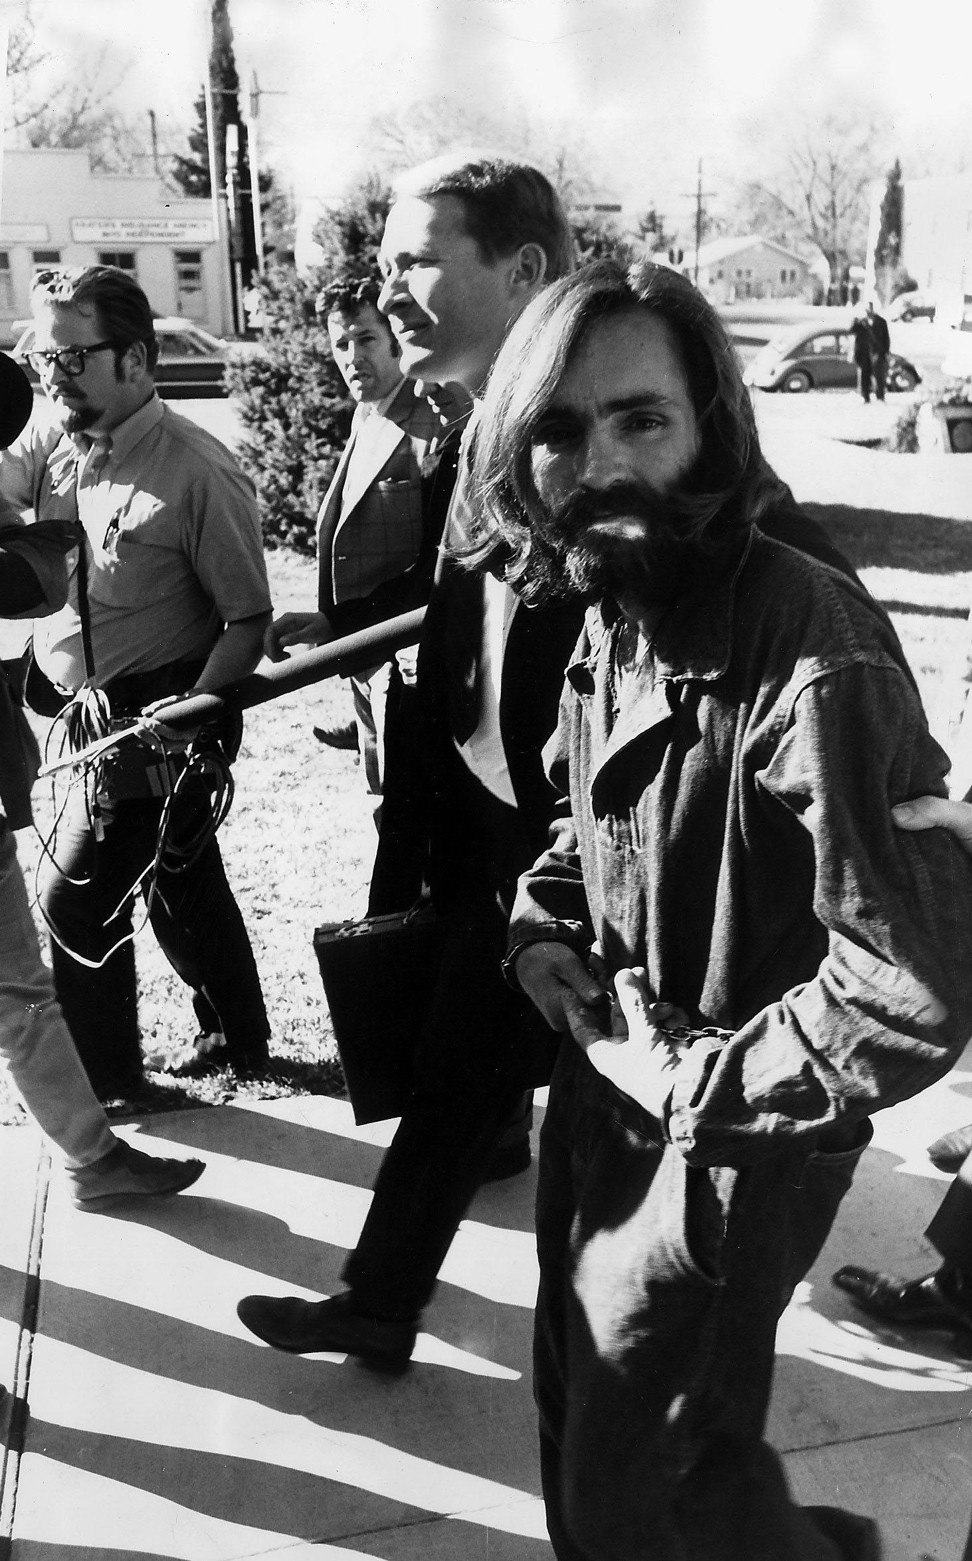 Charles Manson being led away by police agents after being accused of the murders of Sharon Tate and four others. Photo: Alamy